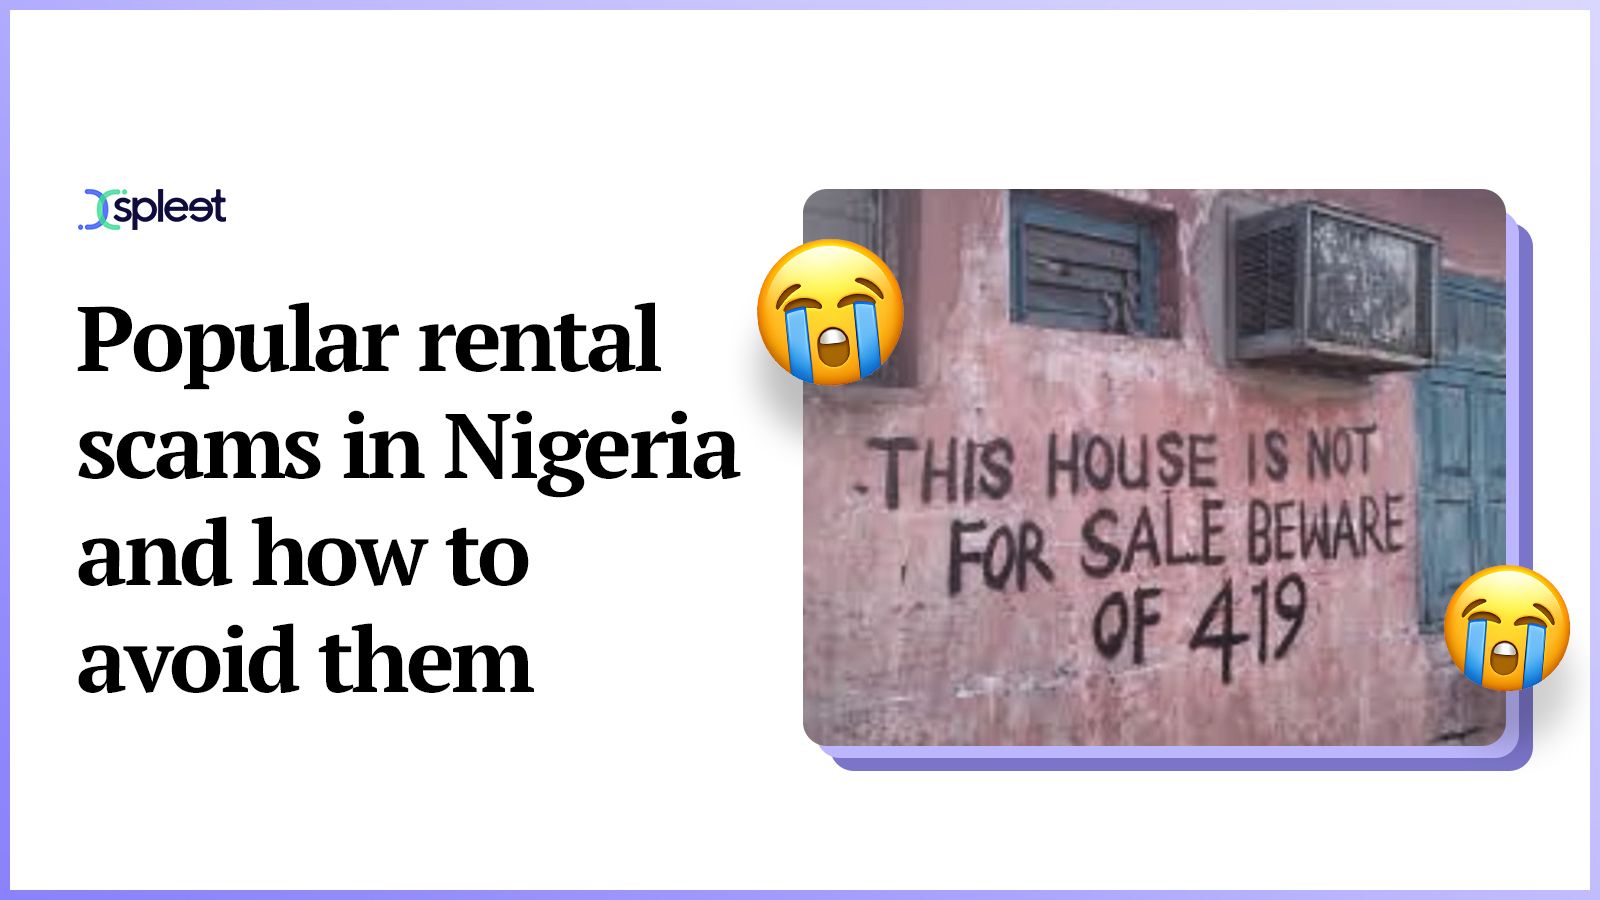 Popular rental scams in Nigeria and how to avoid them